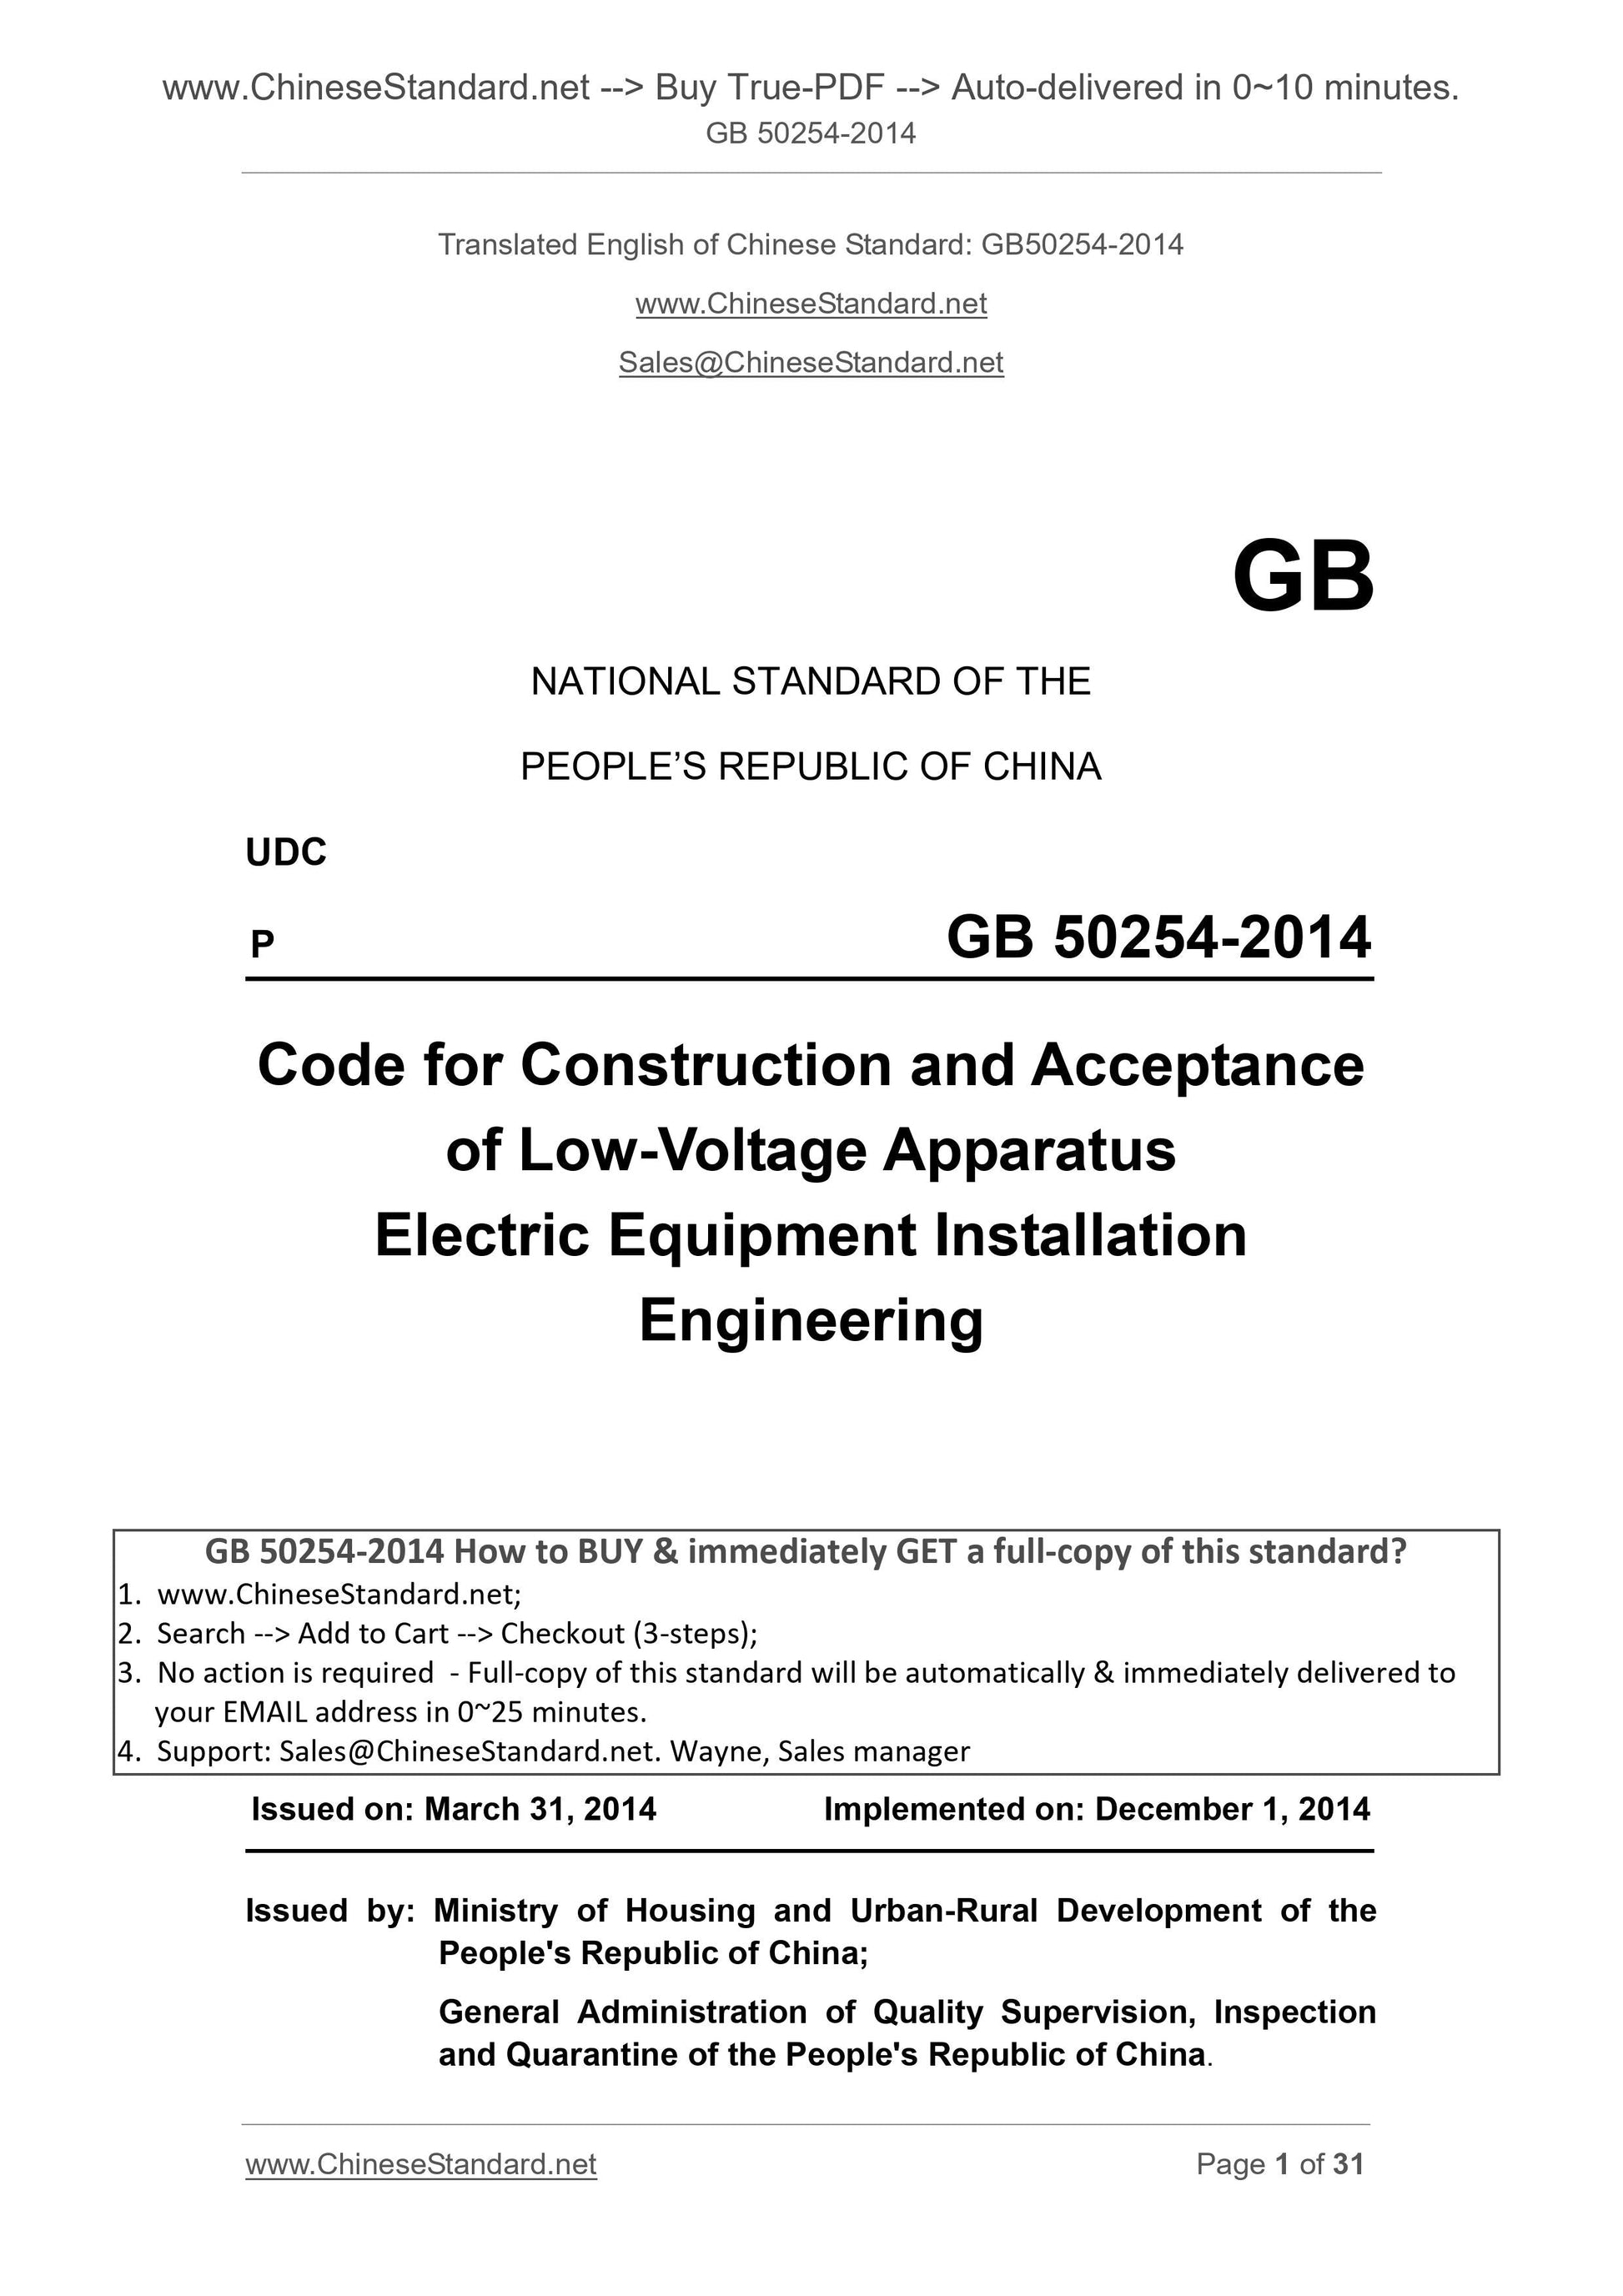 GB 50254-2014 Page 1